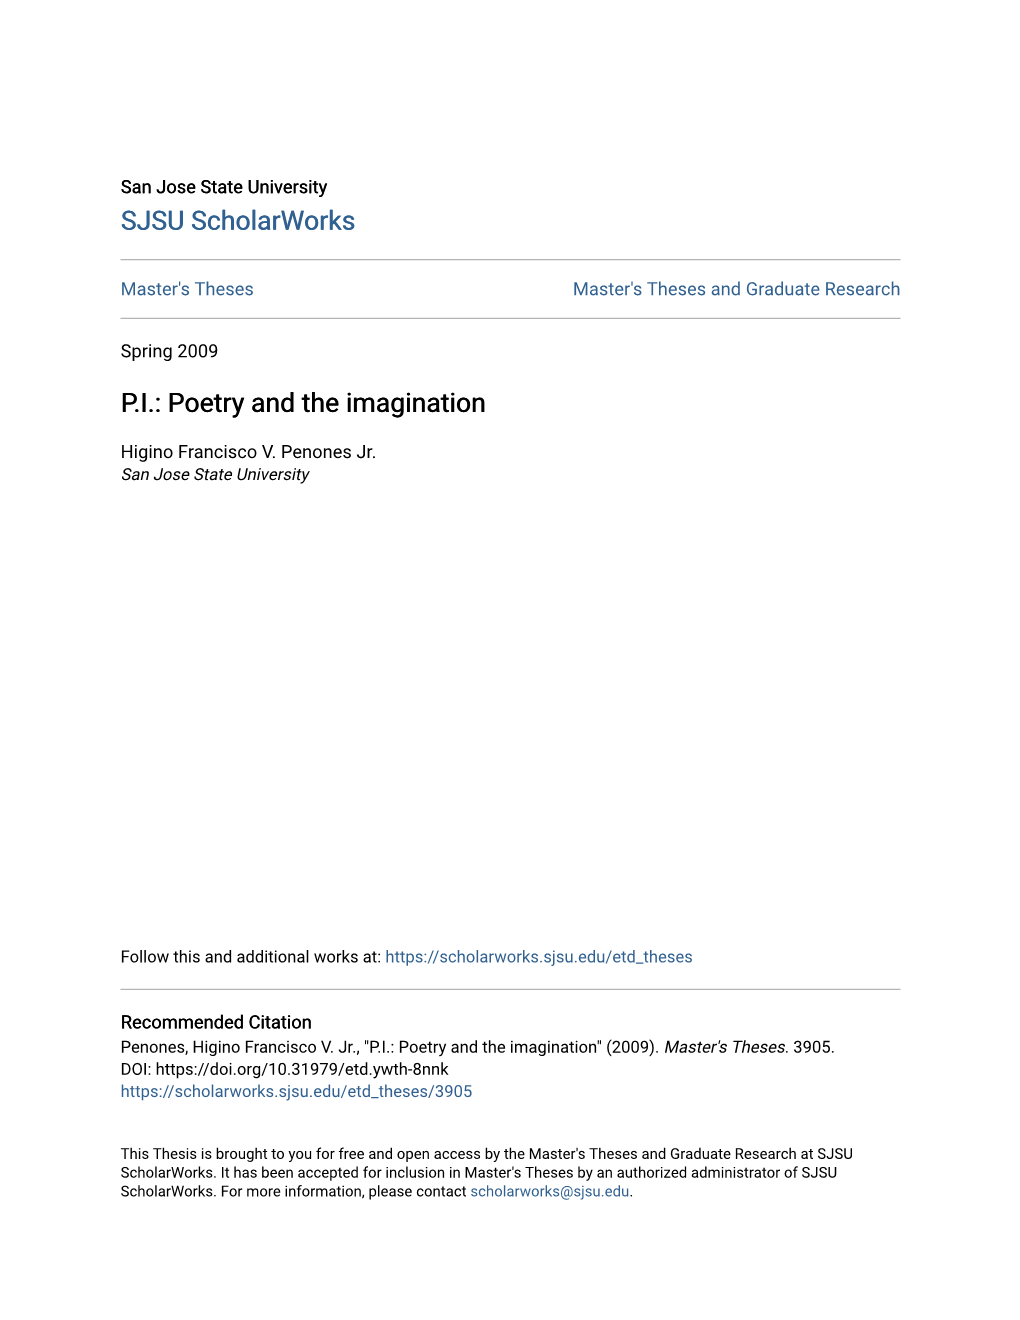 P.I.: Poetry and the Imagination